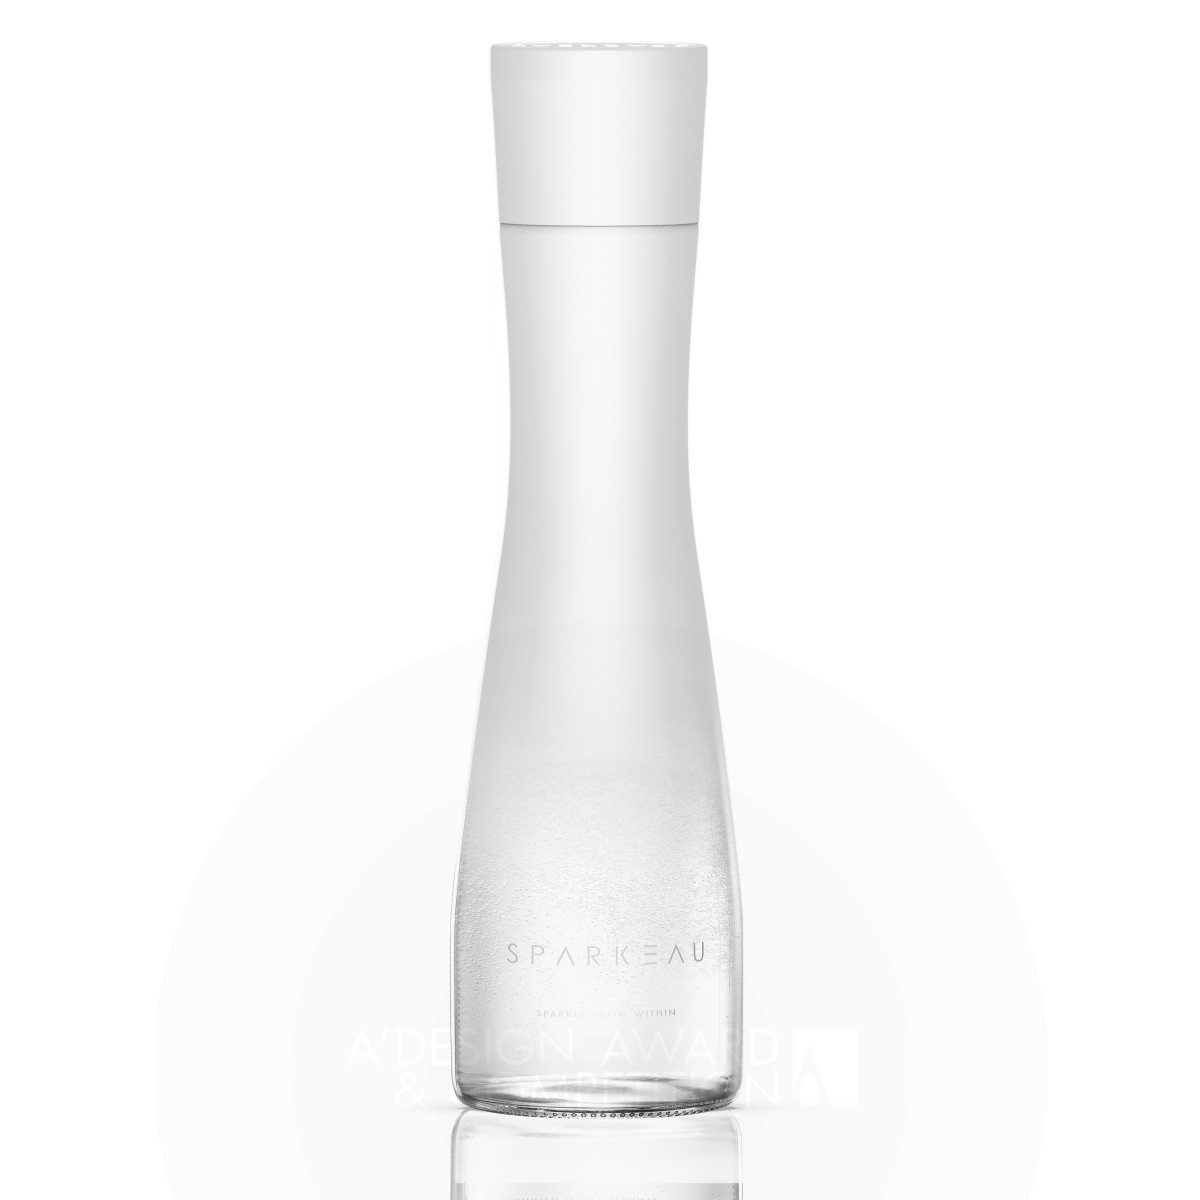 Jus Qi Co., Ltd, Wei Ping Chen wins Silver at the prestigious A' Packaging Design Award with Sparkeau Sparkling Water Bottle.